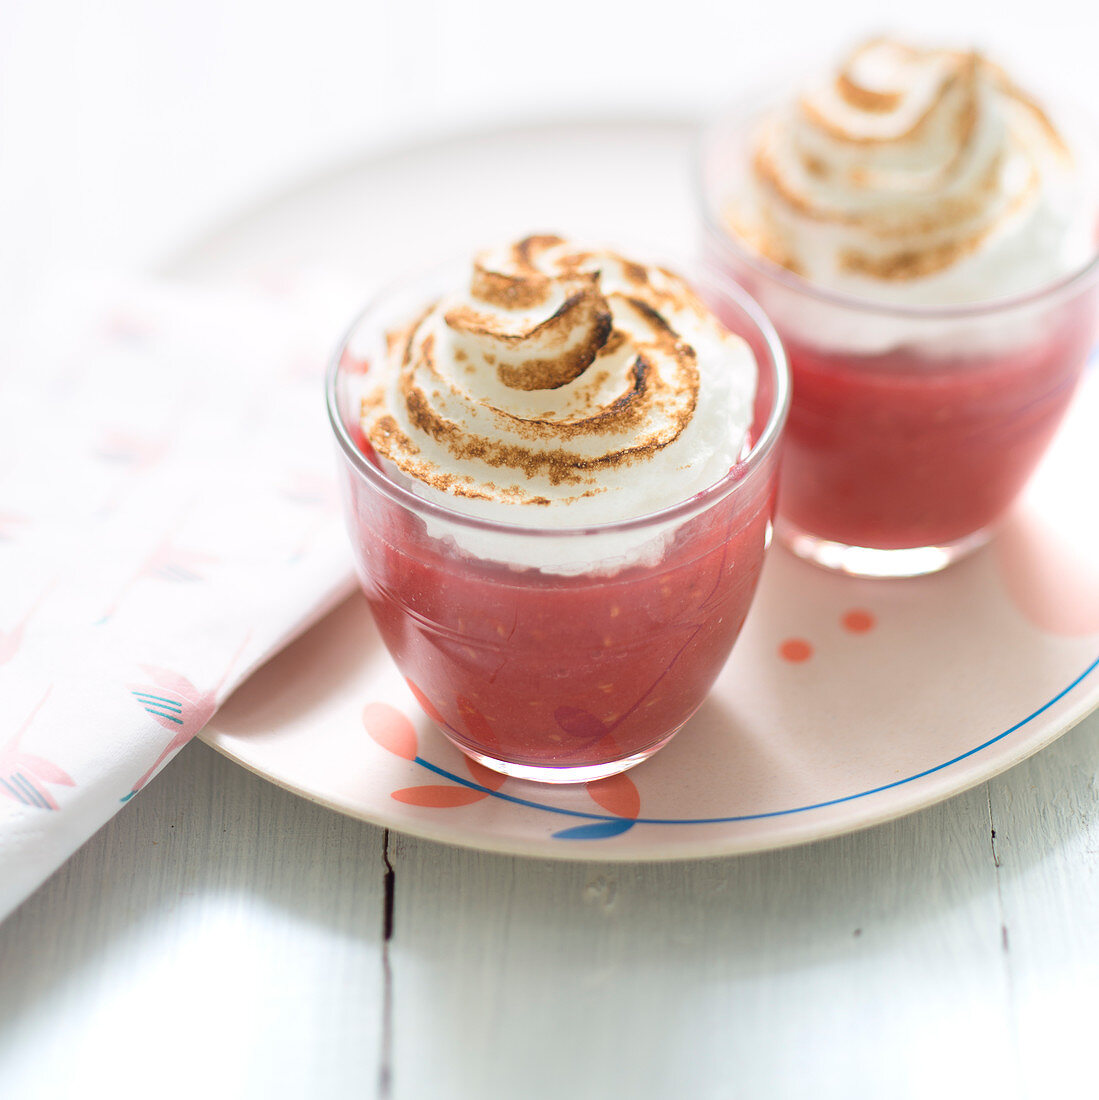 Apple,strawberry and water melon soup topped with meringue